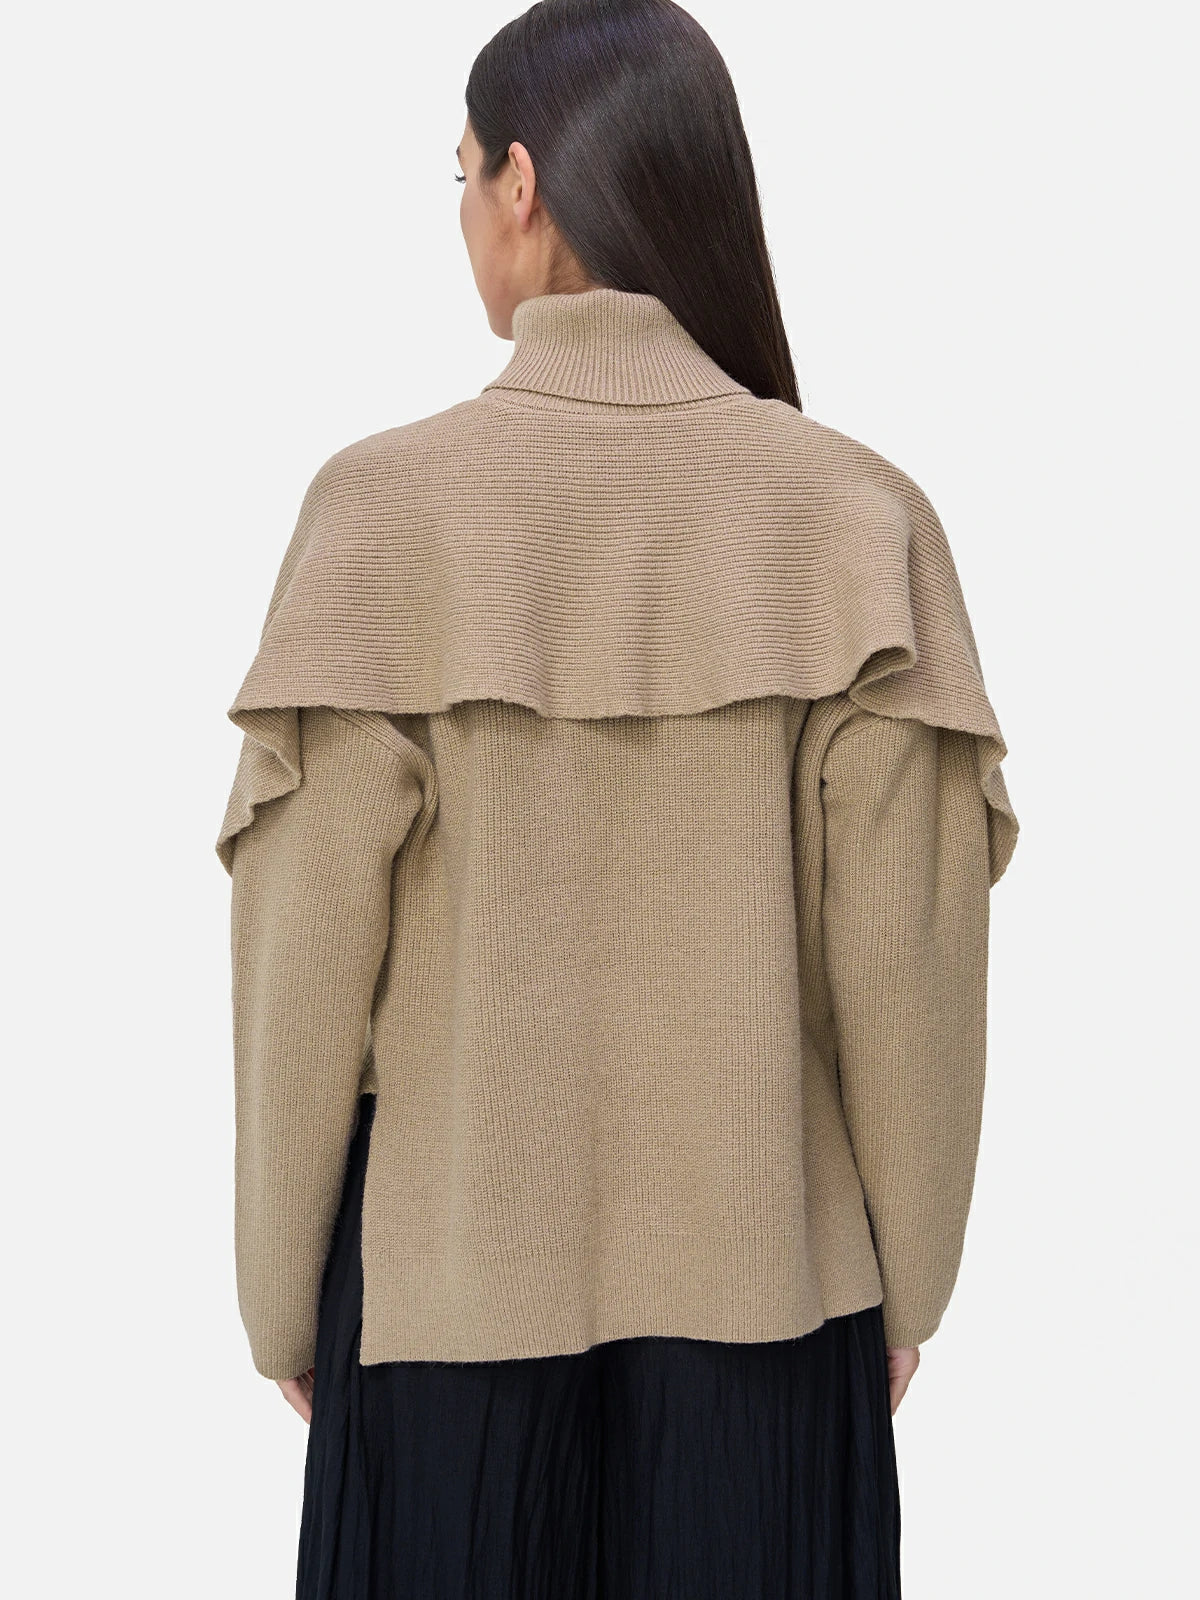 Innovative Fashion Choice: Turtleneck Sweater with Special Back Detailing